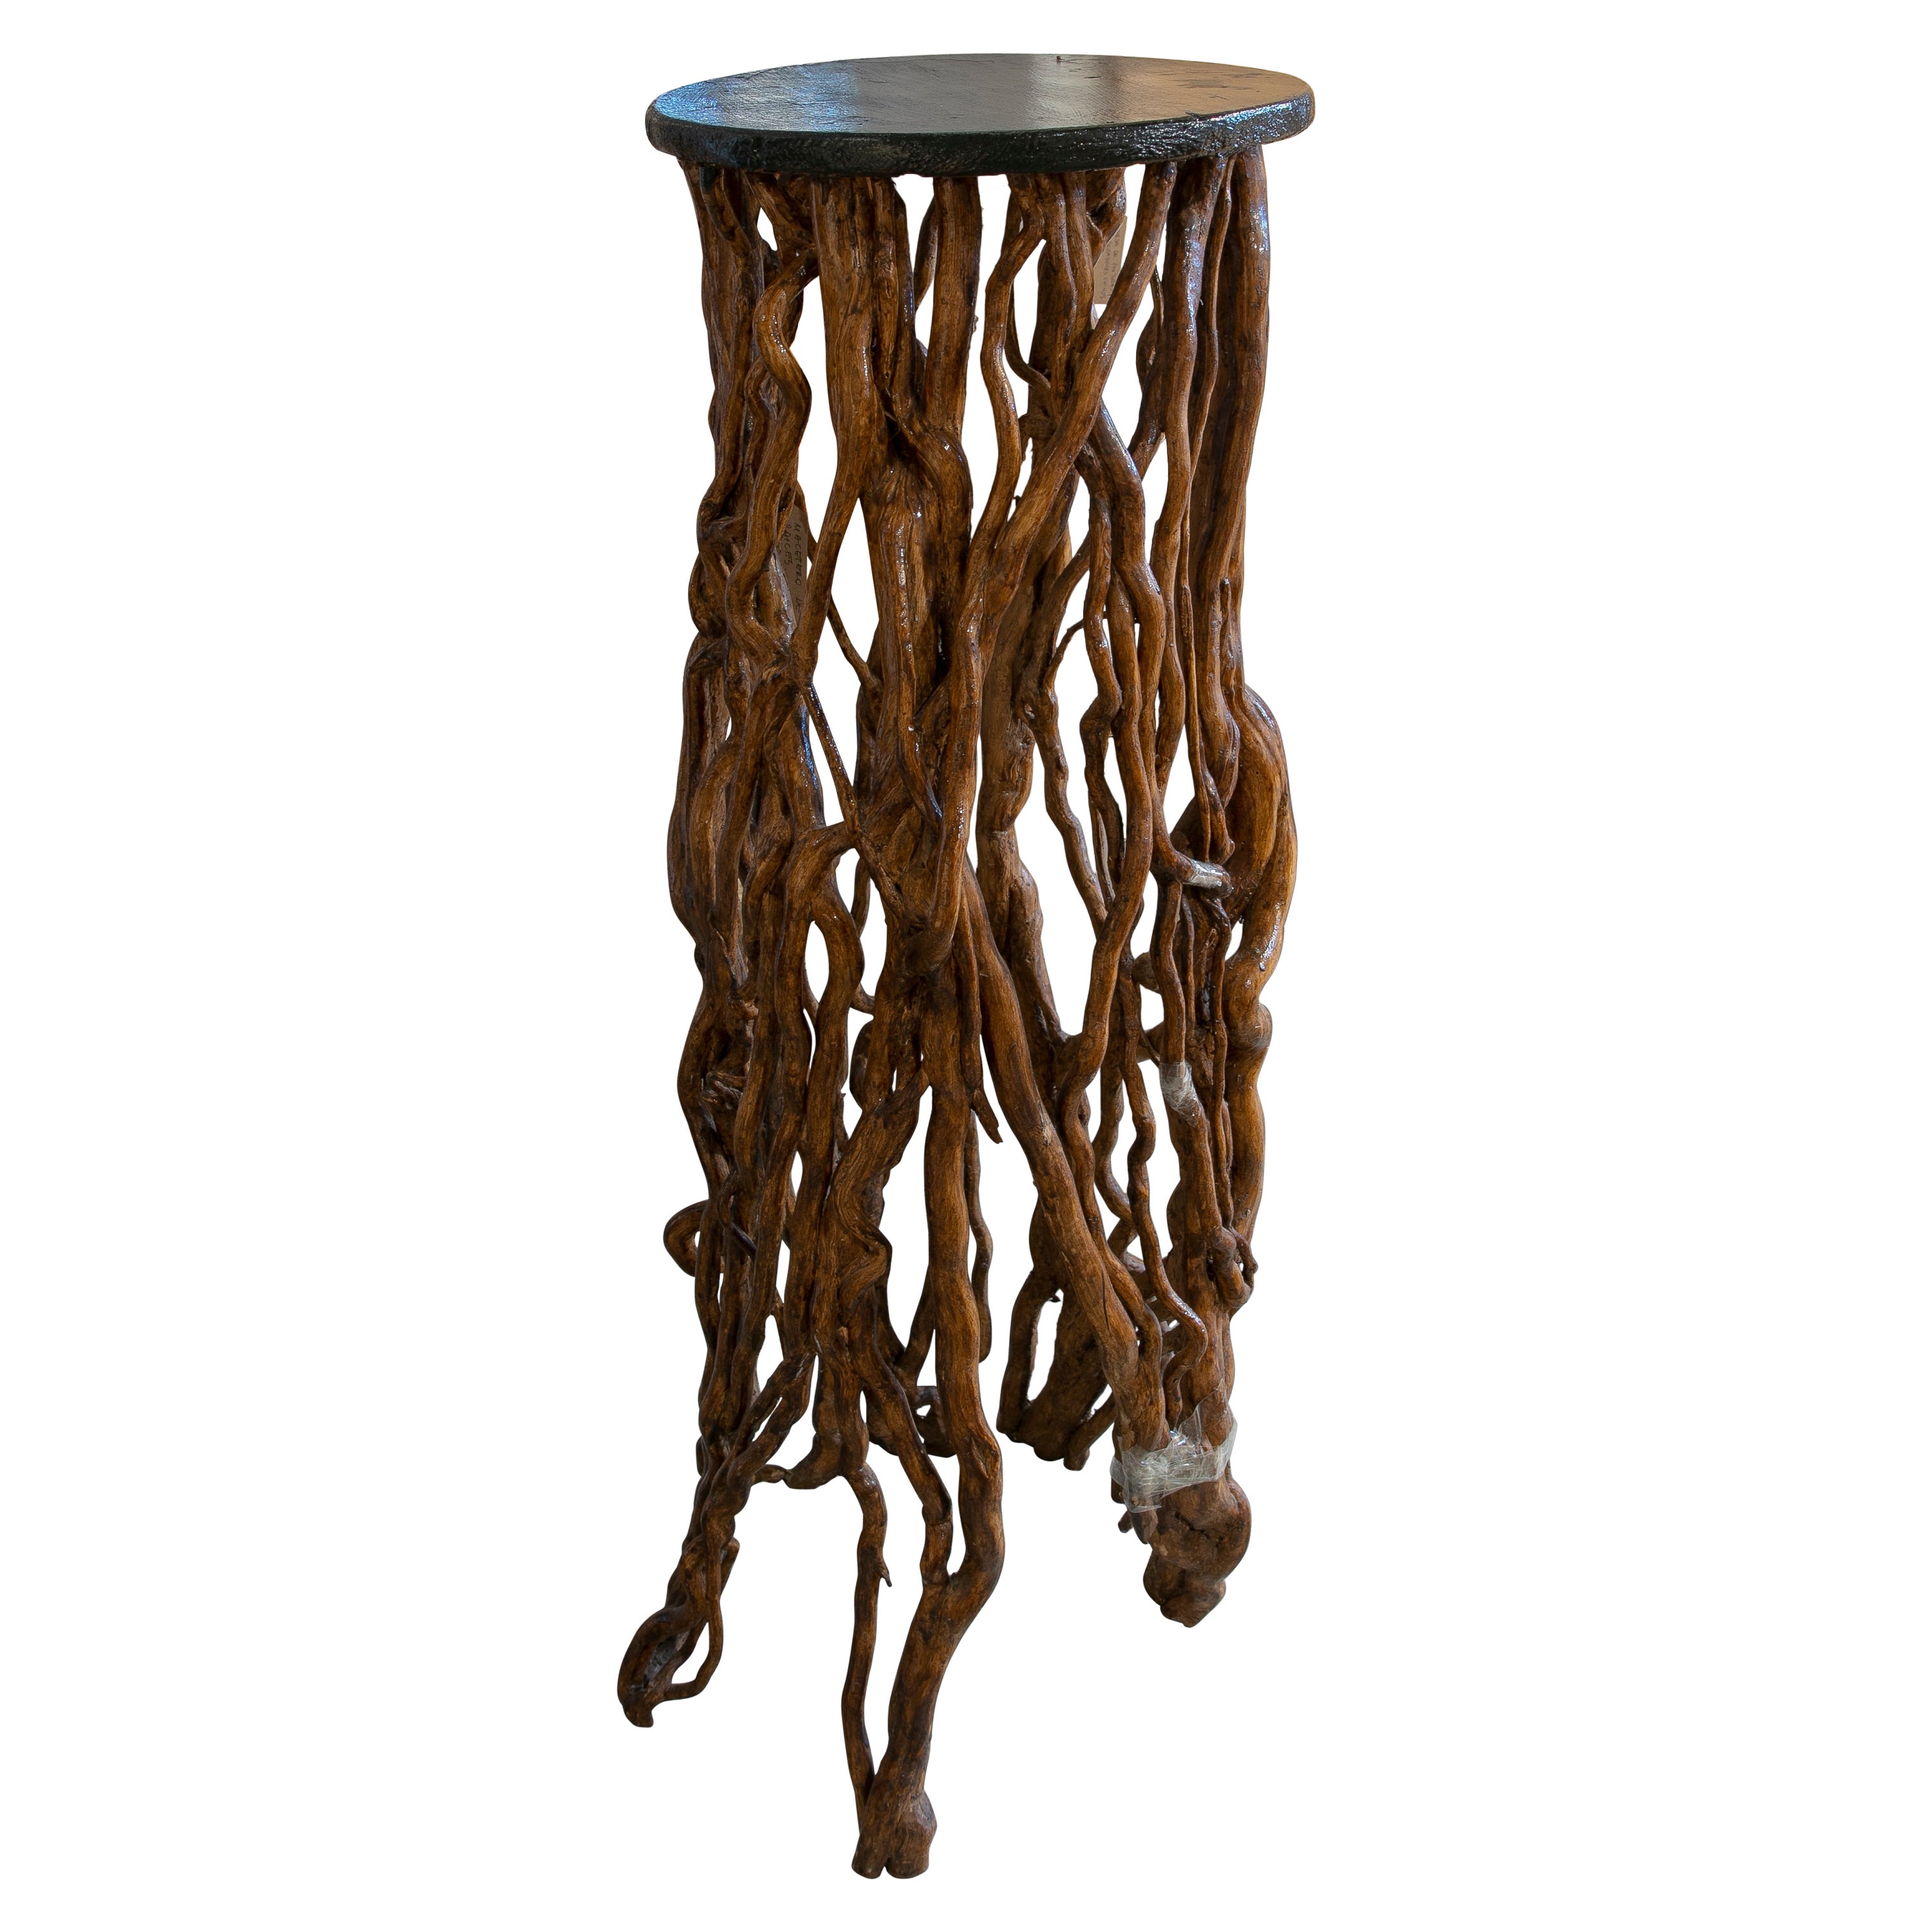 1970s Wooden Pedestal Made with Natural Branches